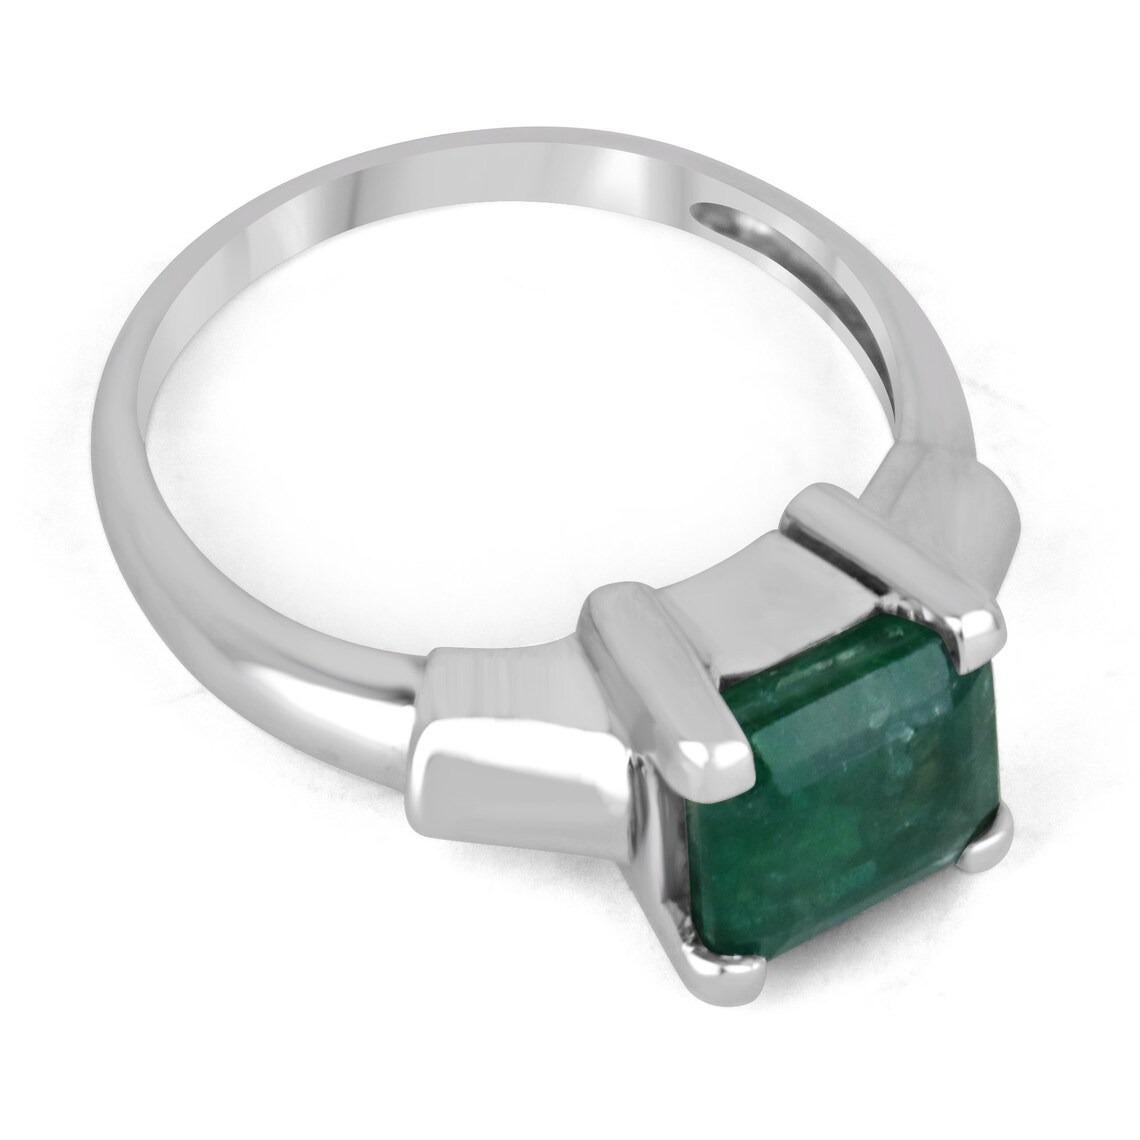 Featured is a bold solitaire emerald engagement/right-hand ring. This luxurious piece showcases a remarkable 2.15-carat, natural Asscher cut Zambian emerald, displaying lush bluish-green color, veyr good luster, and many more mesmerizing